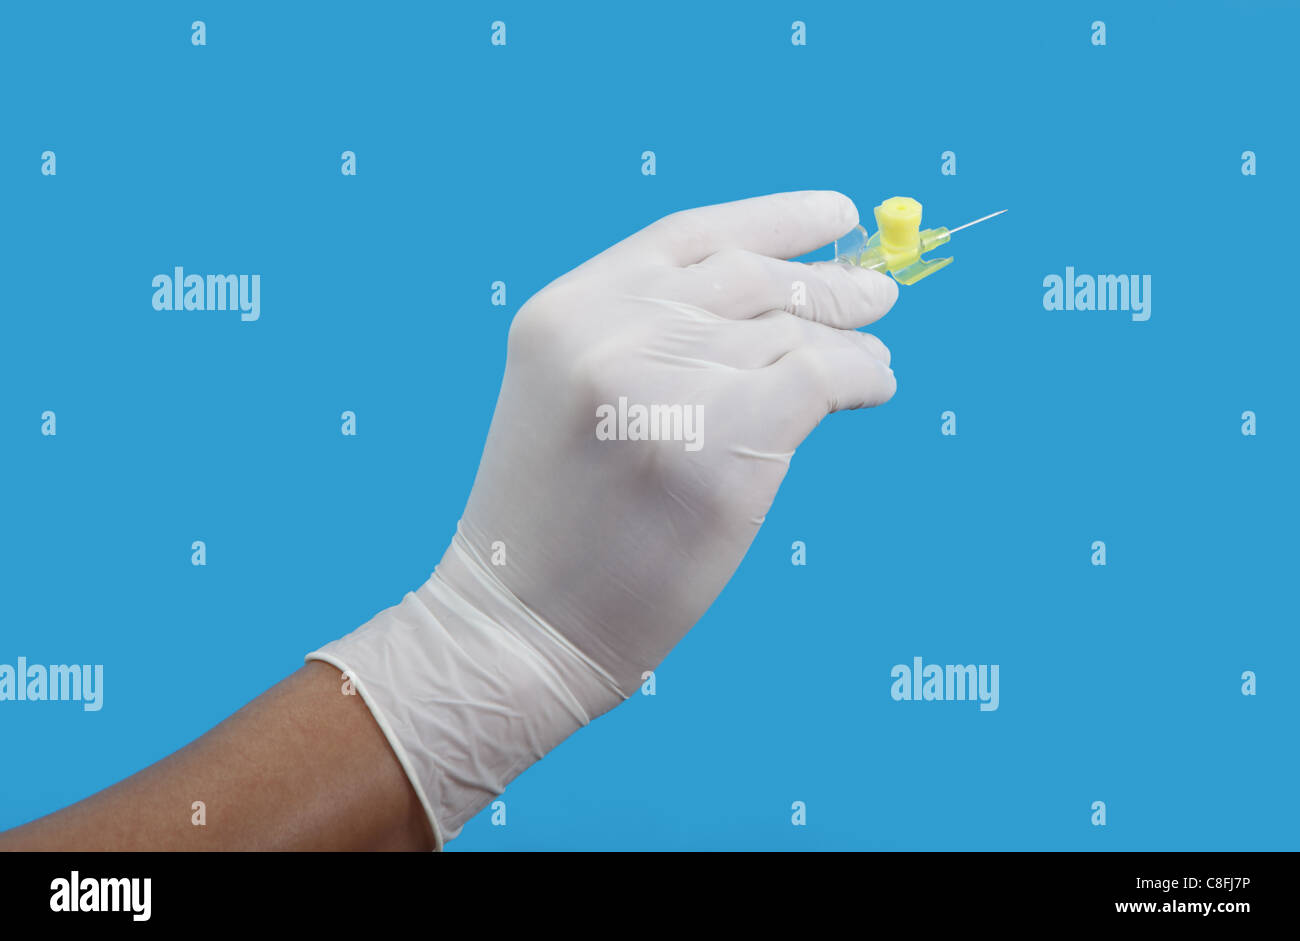 Hand in surgical glove holding a small intravenous needle against a blue background. Stock Photo